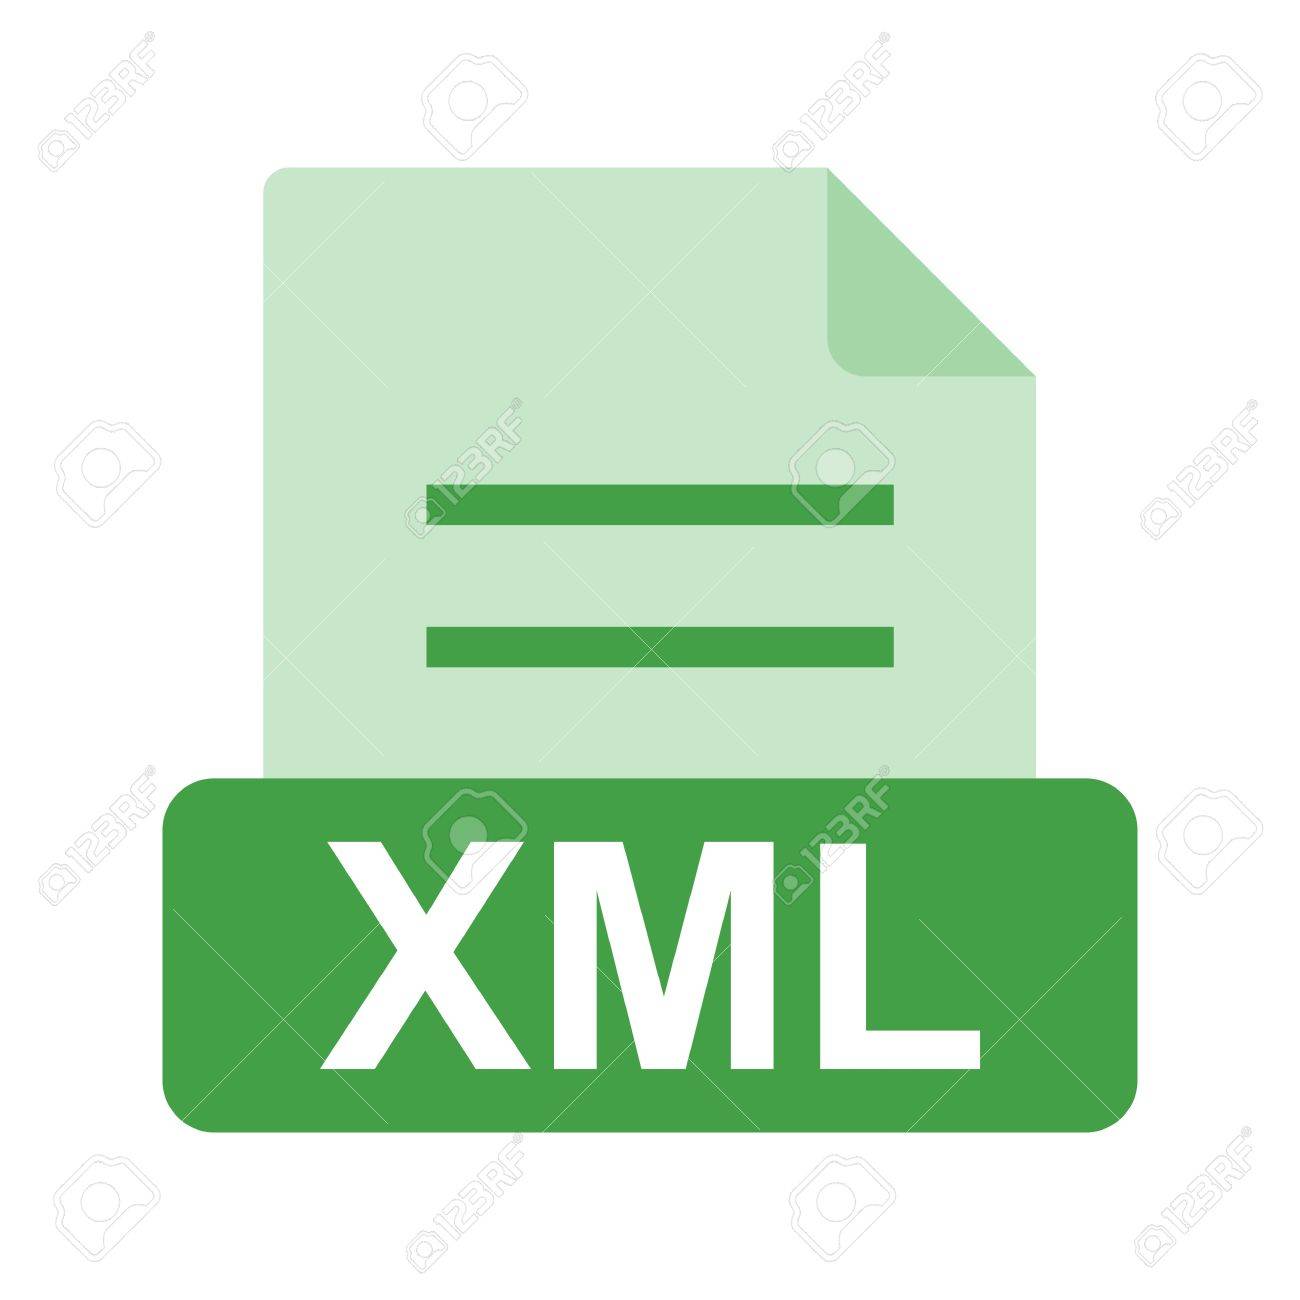 Xml file green icon stock illustration - Search Clipart, Drawings 